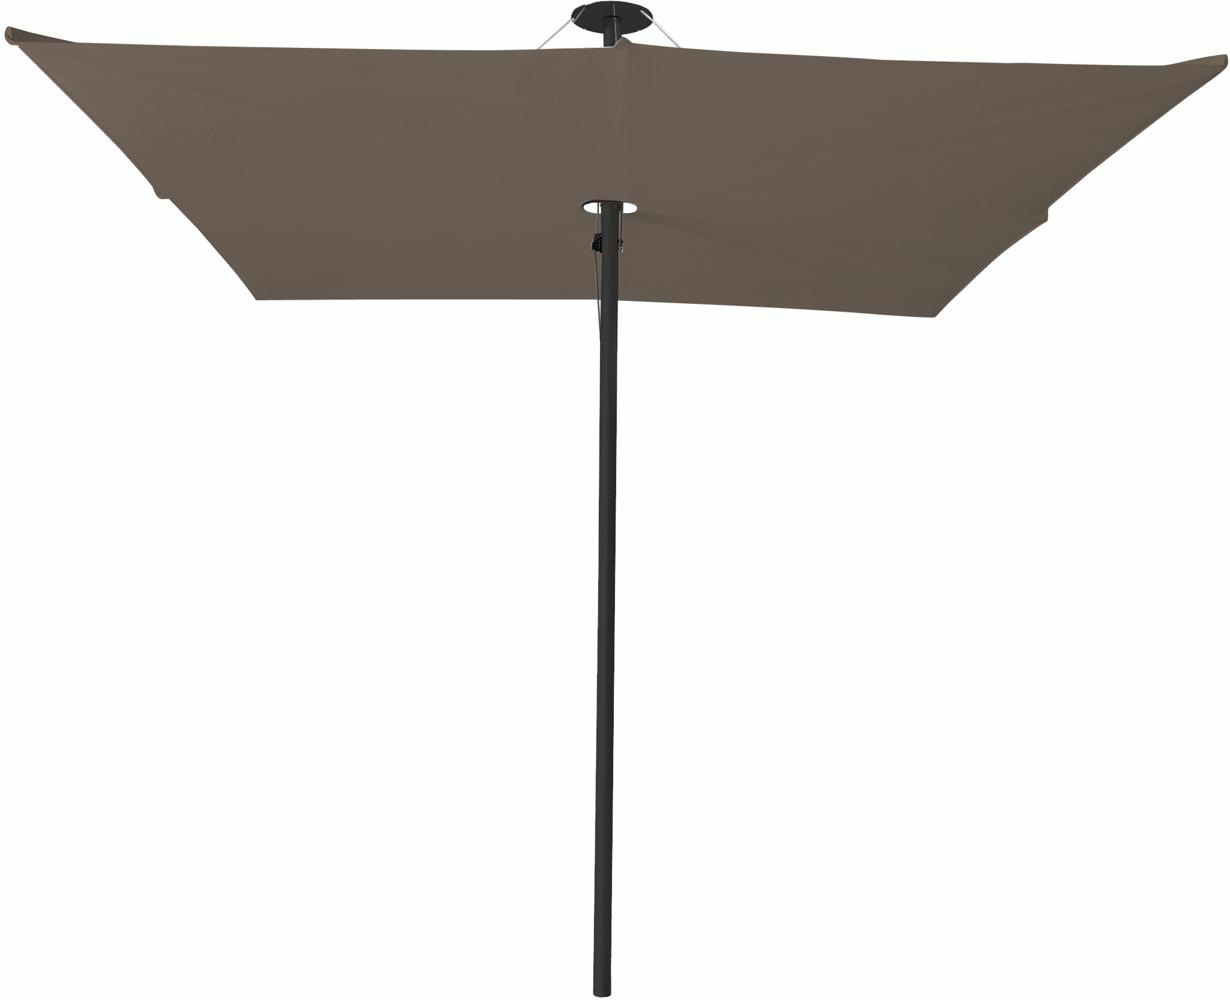 Infina center post umbrella, 2,5 m square, with frame in Dusk and Solidum Taupe canopy. 